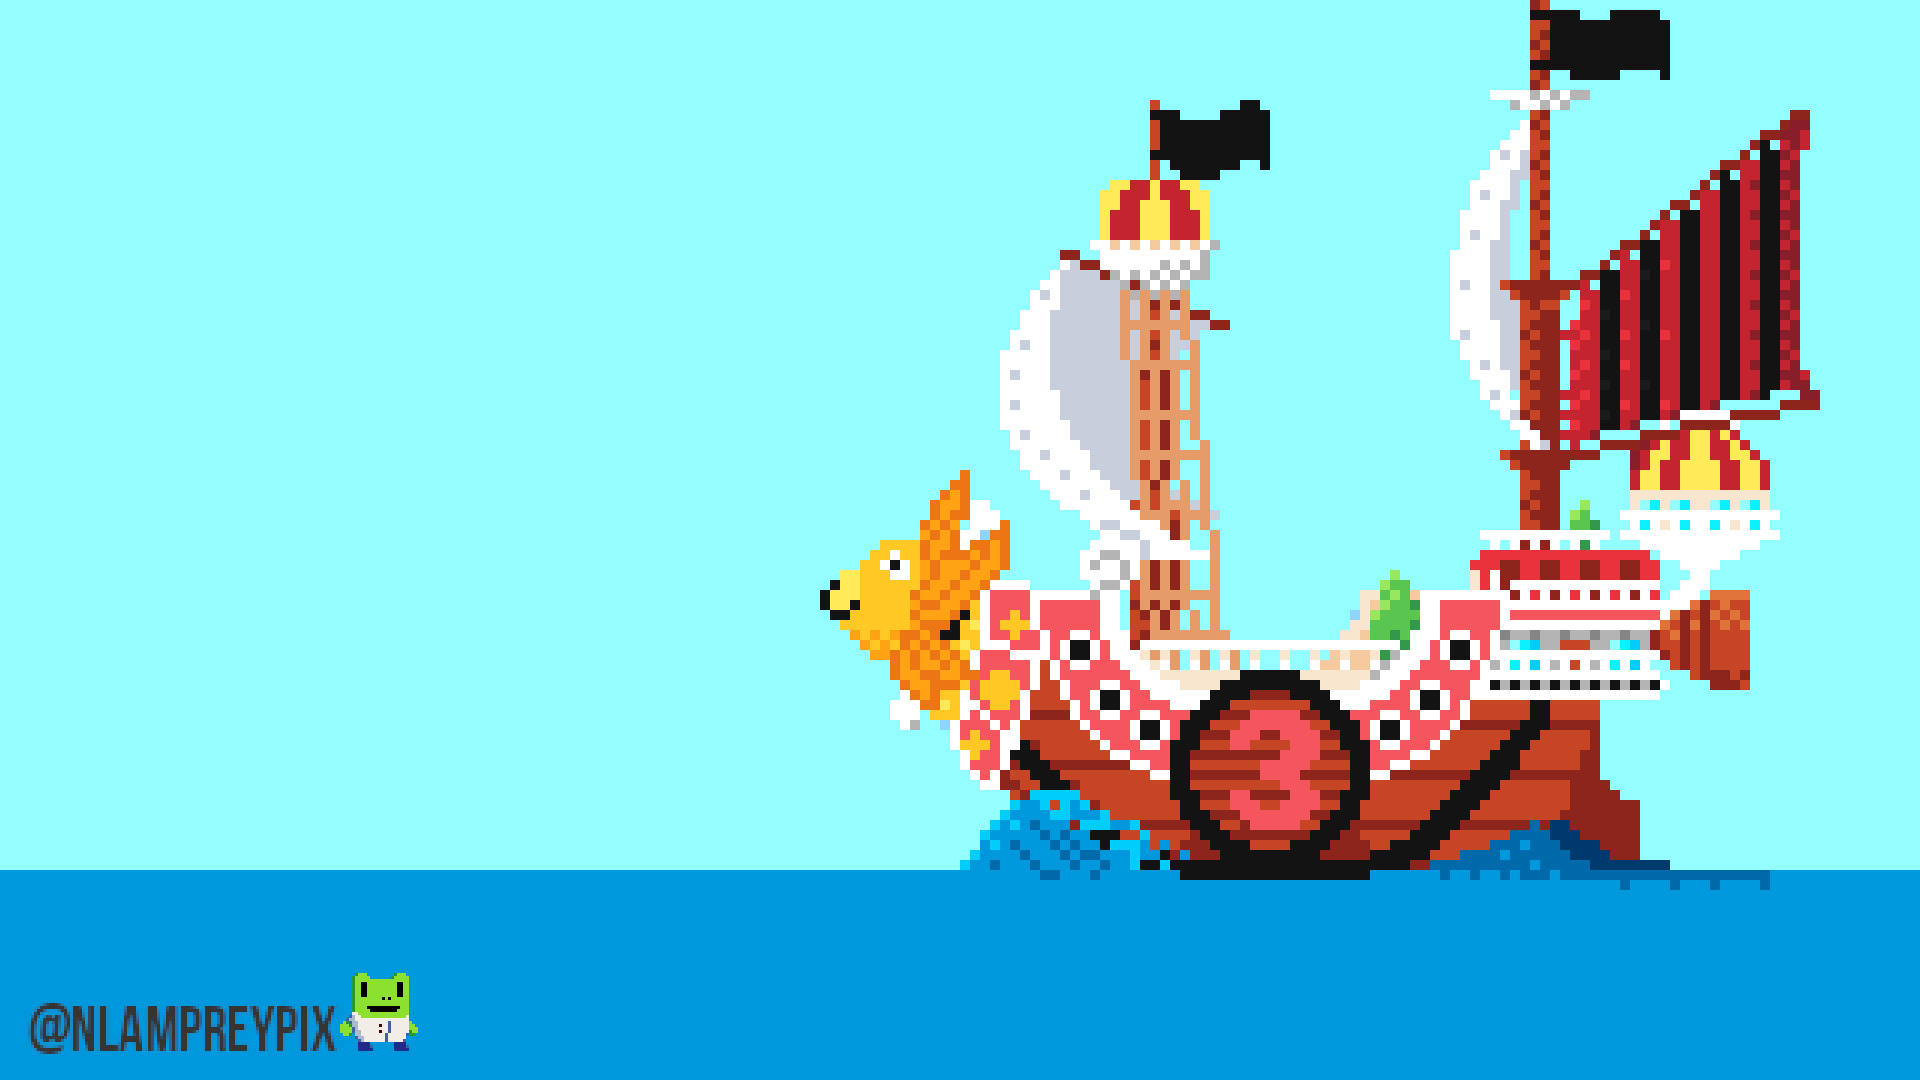 Made a pixelart Thousand Sunny that can be used as a wallpaper